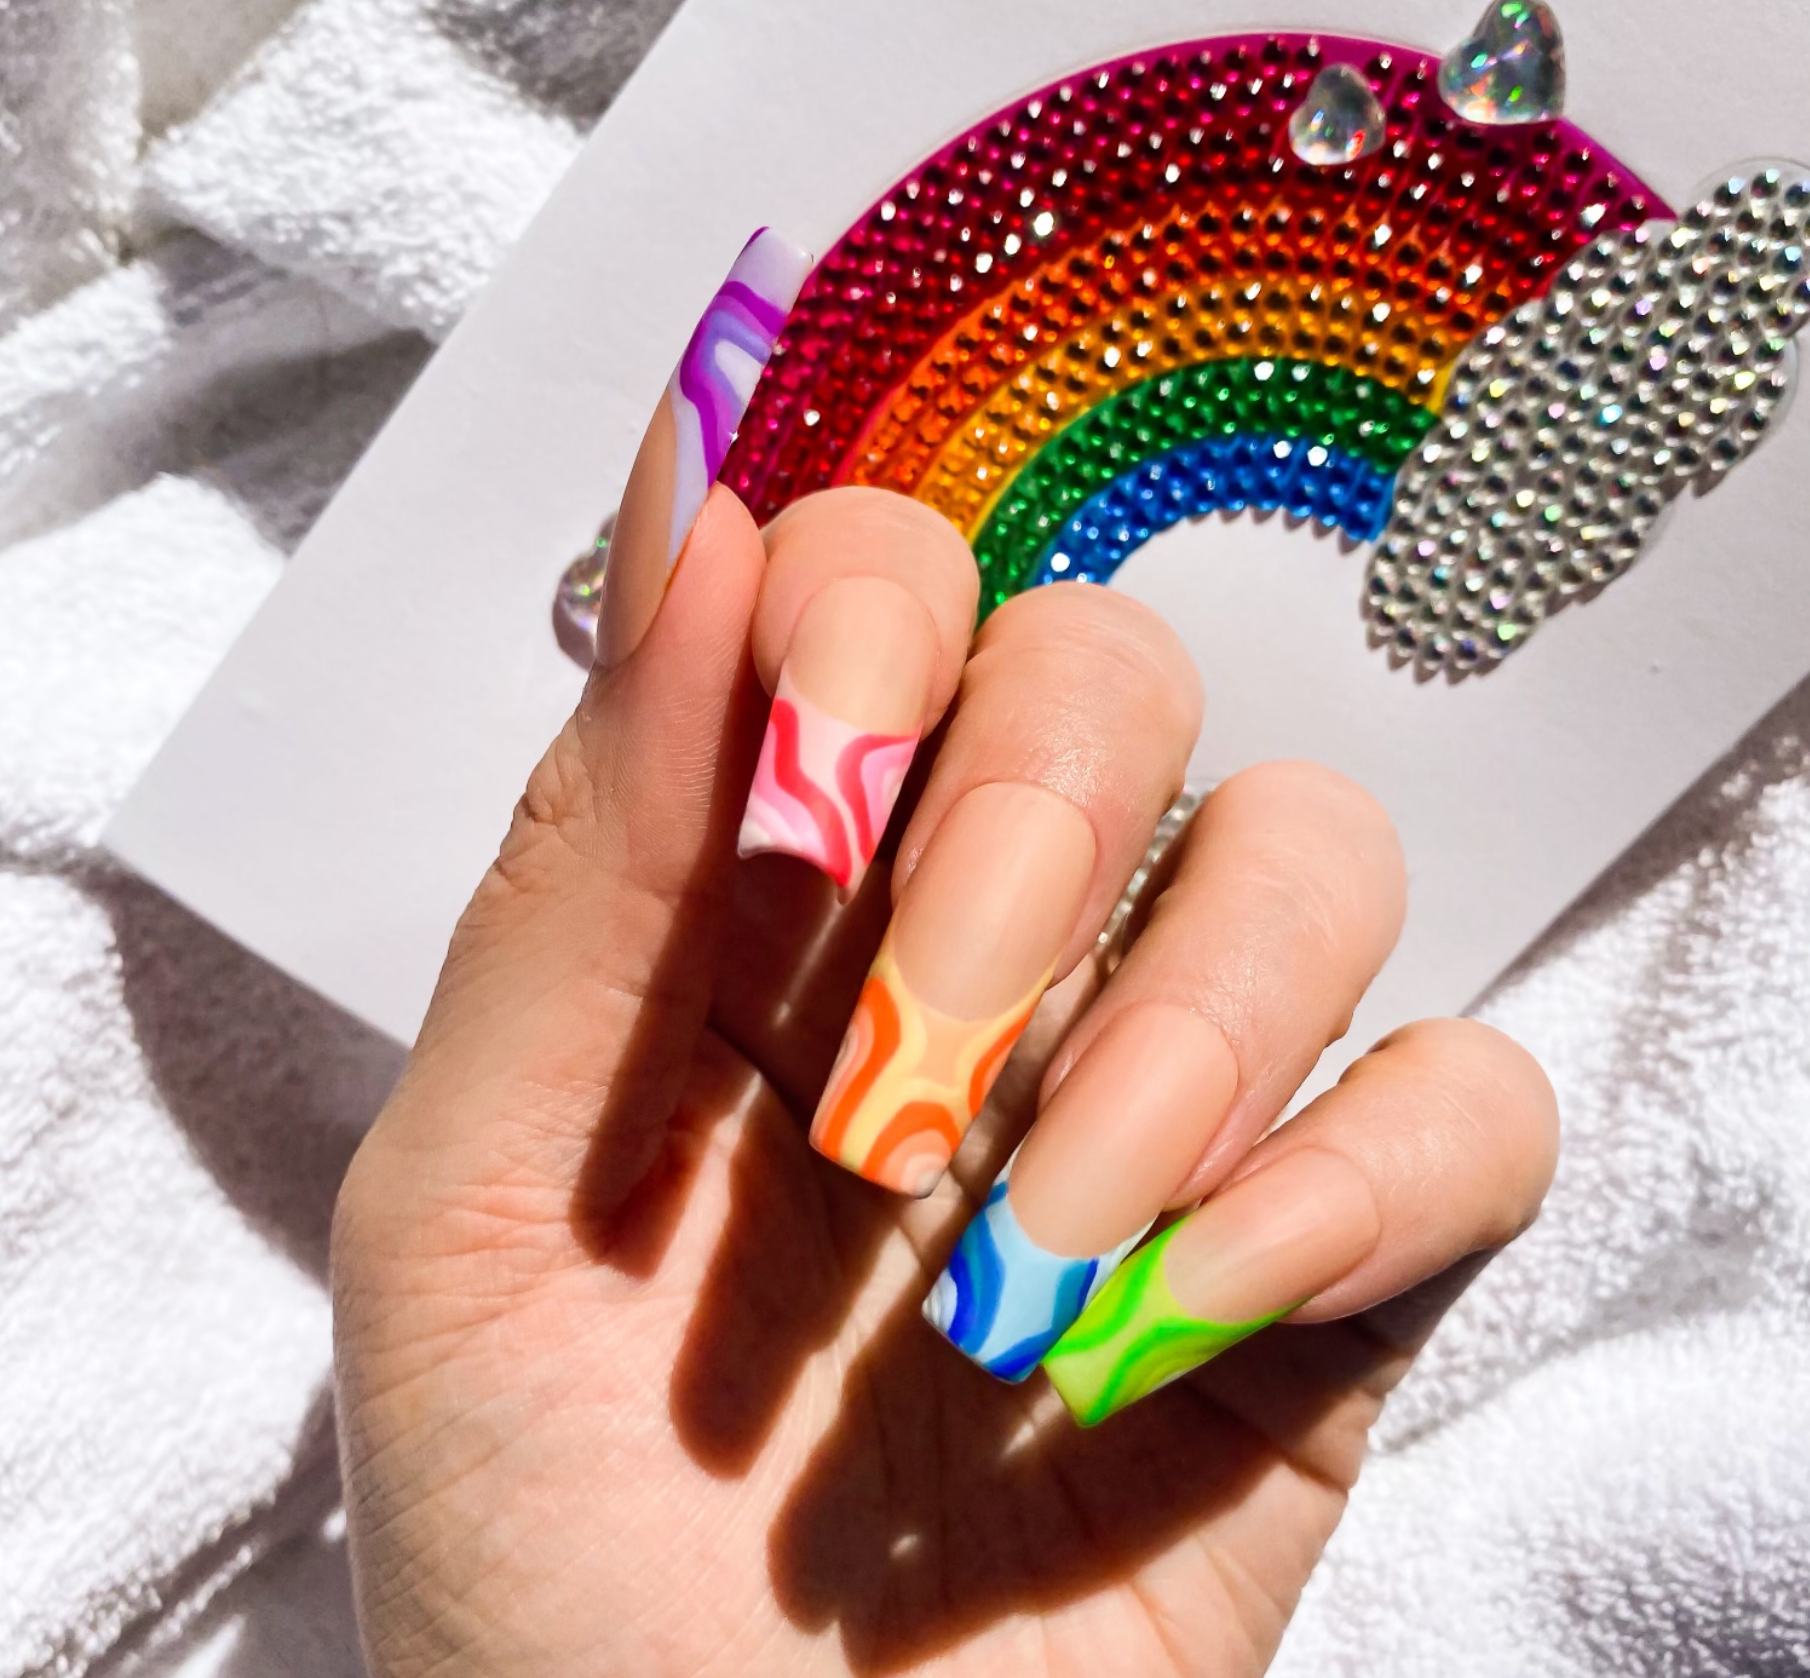 Make a bold statement with these stunning rainbow nails! Featuring a long square length and matte finish, they're the perfect way to showcase your colorful style.